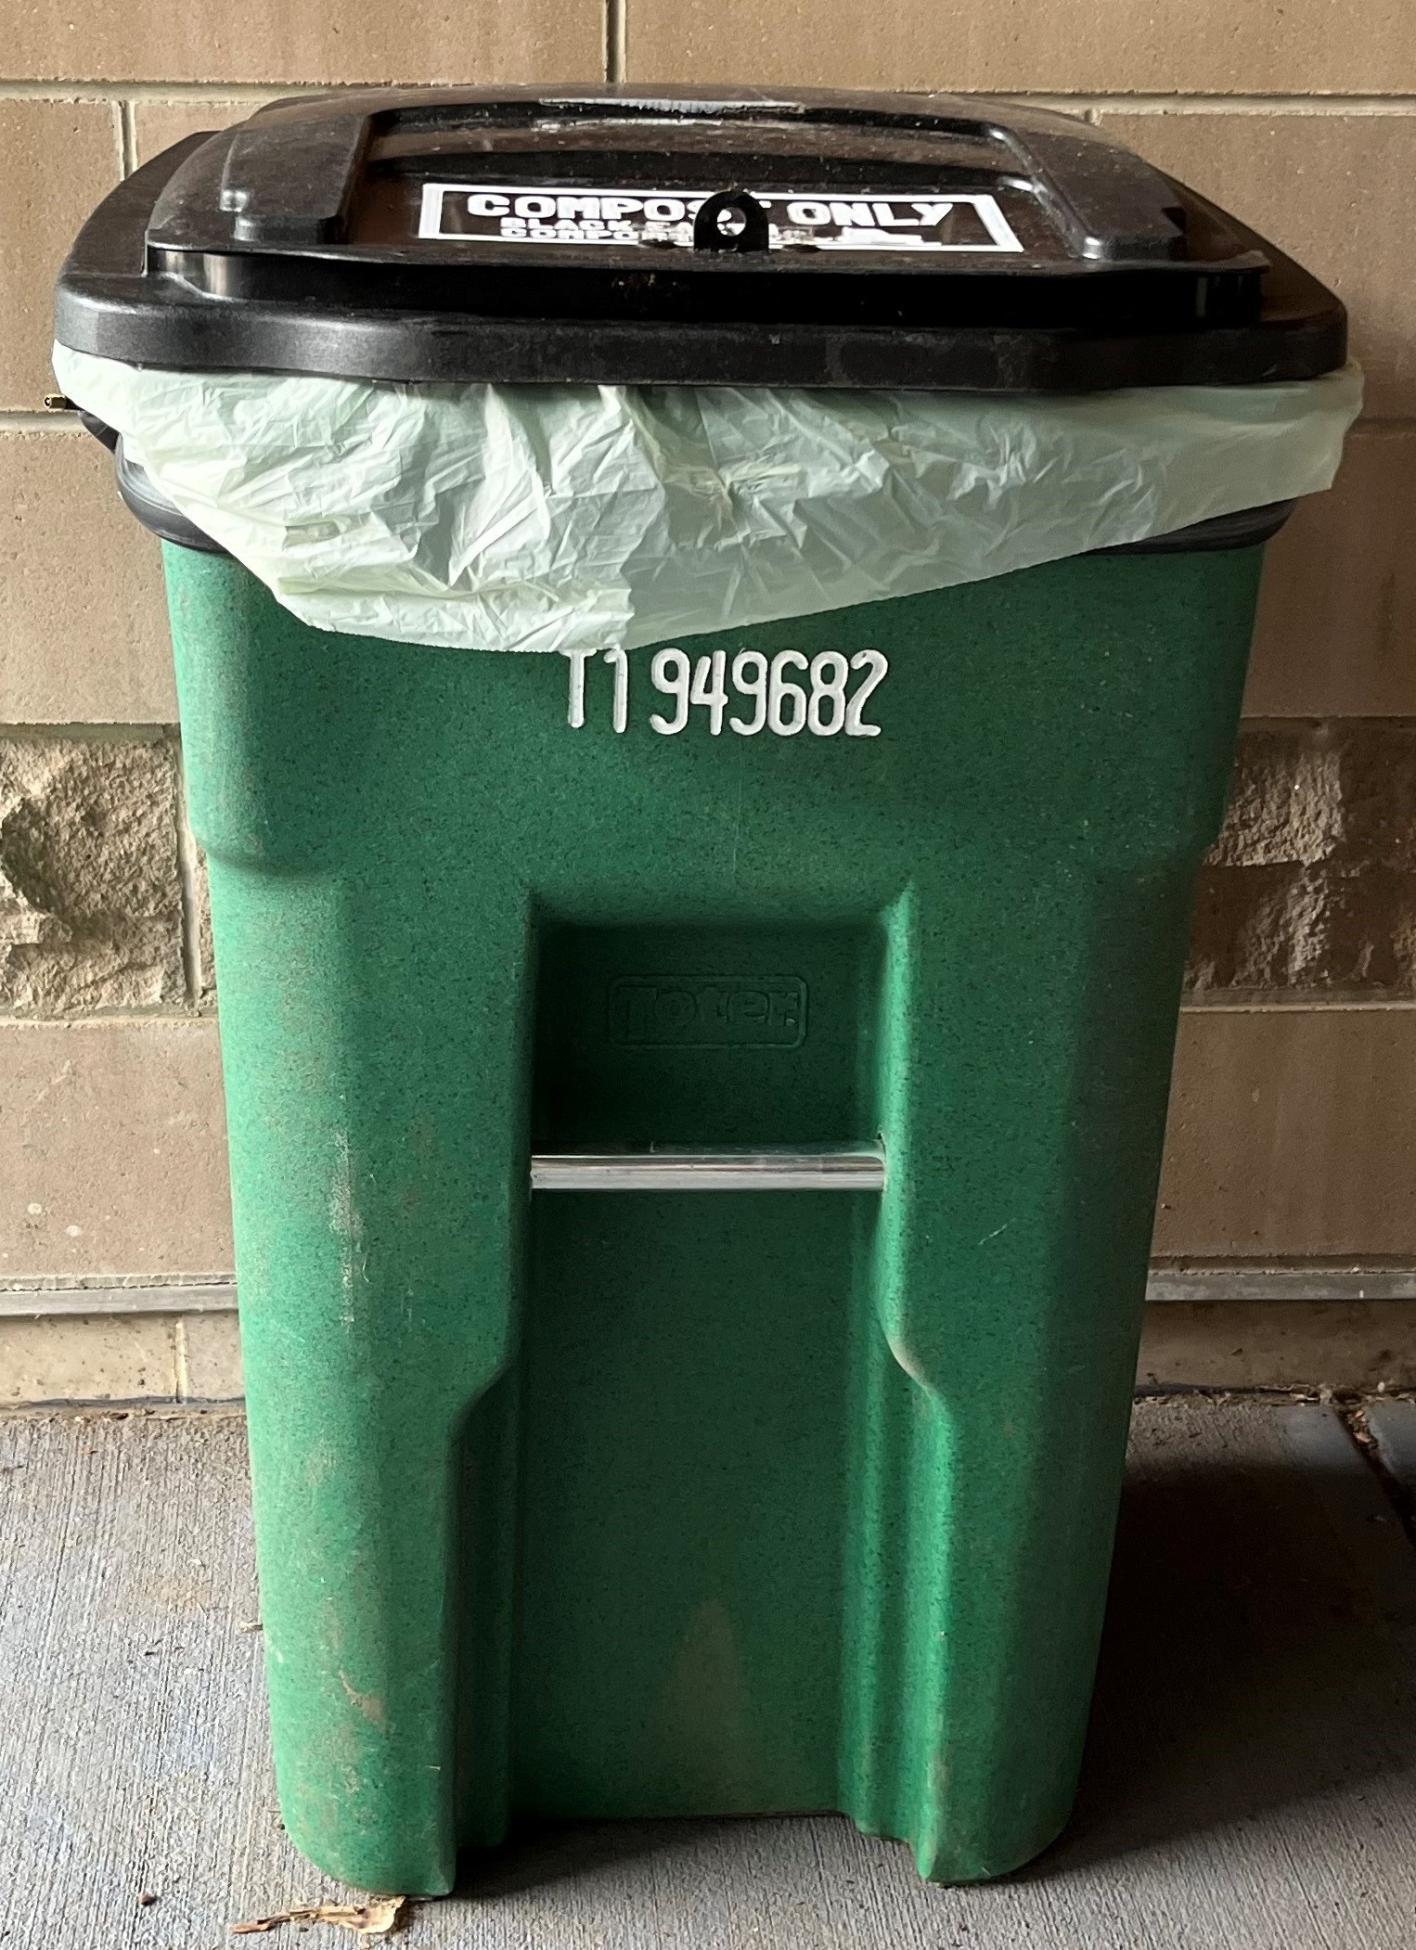 Picture of composting bin at the Sr Center